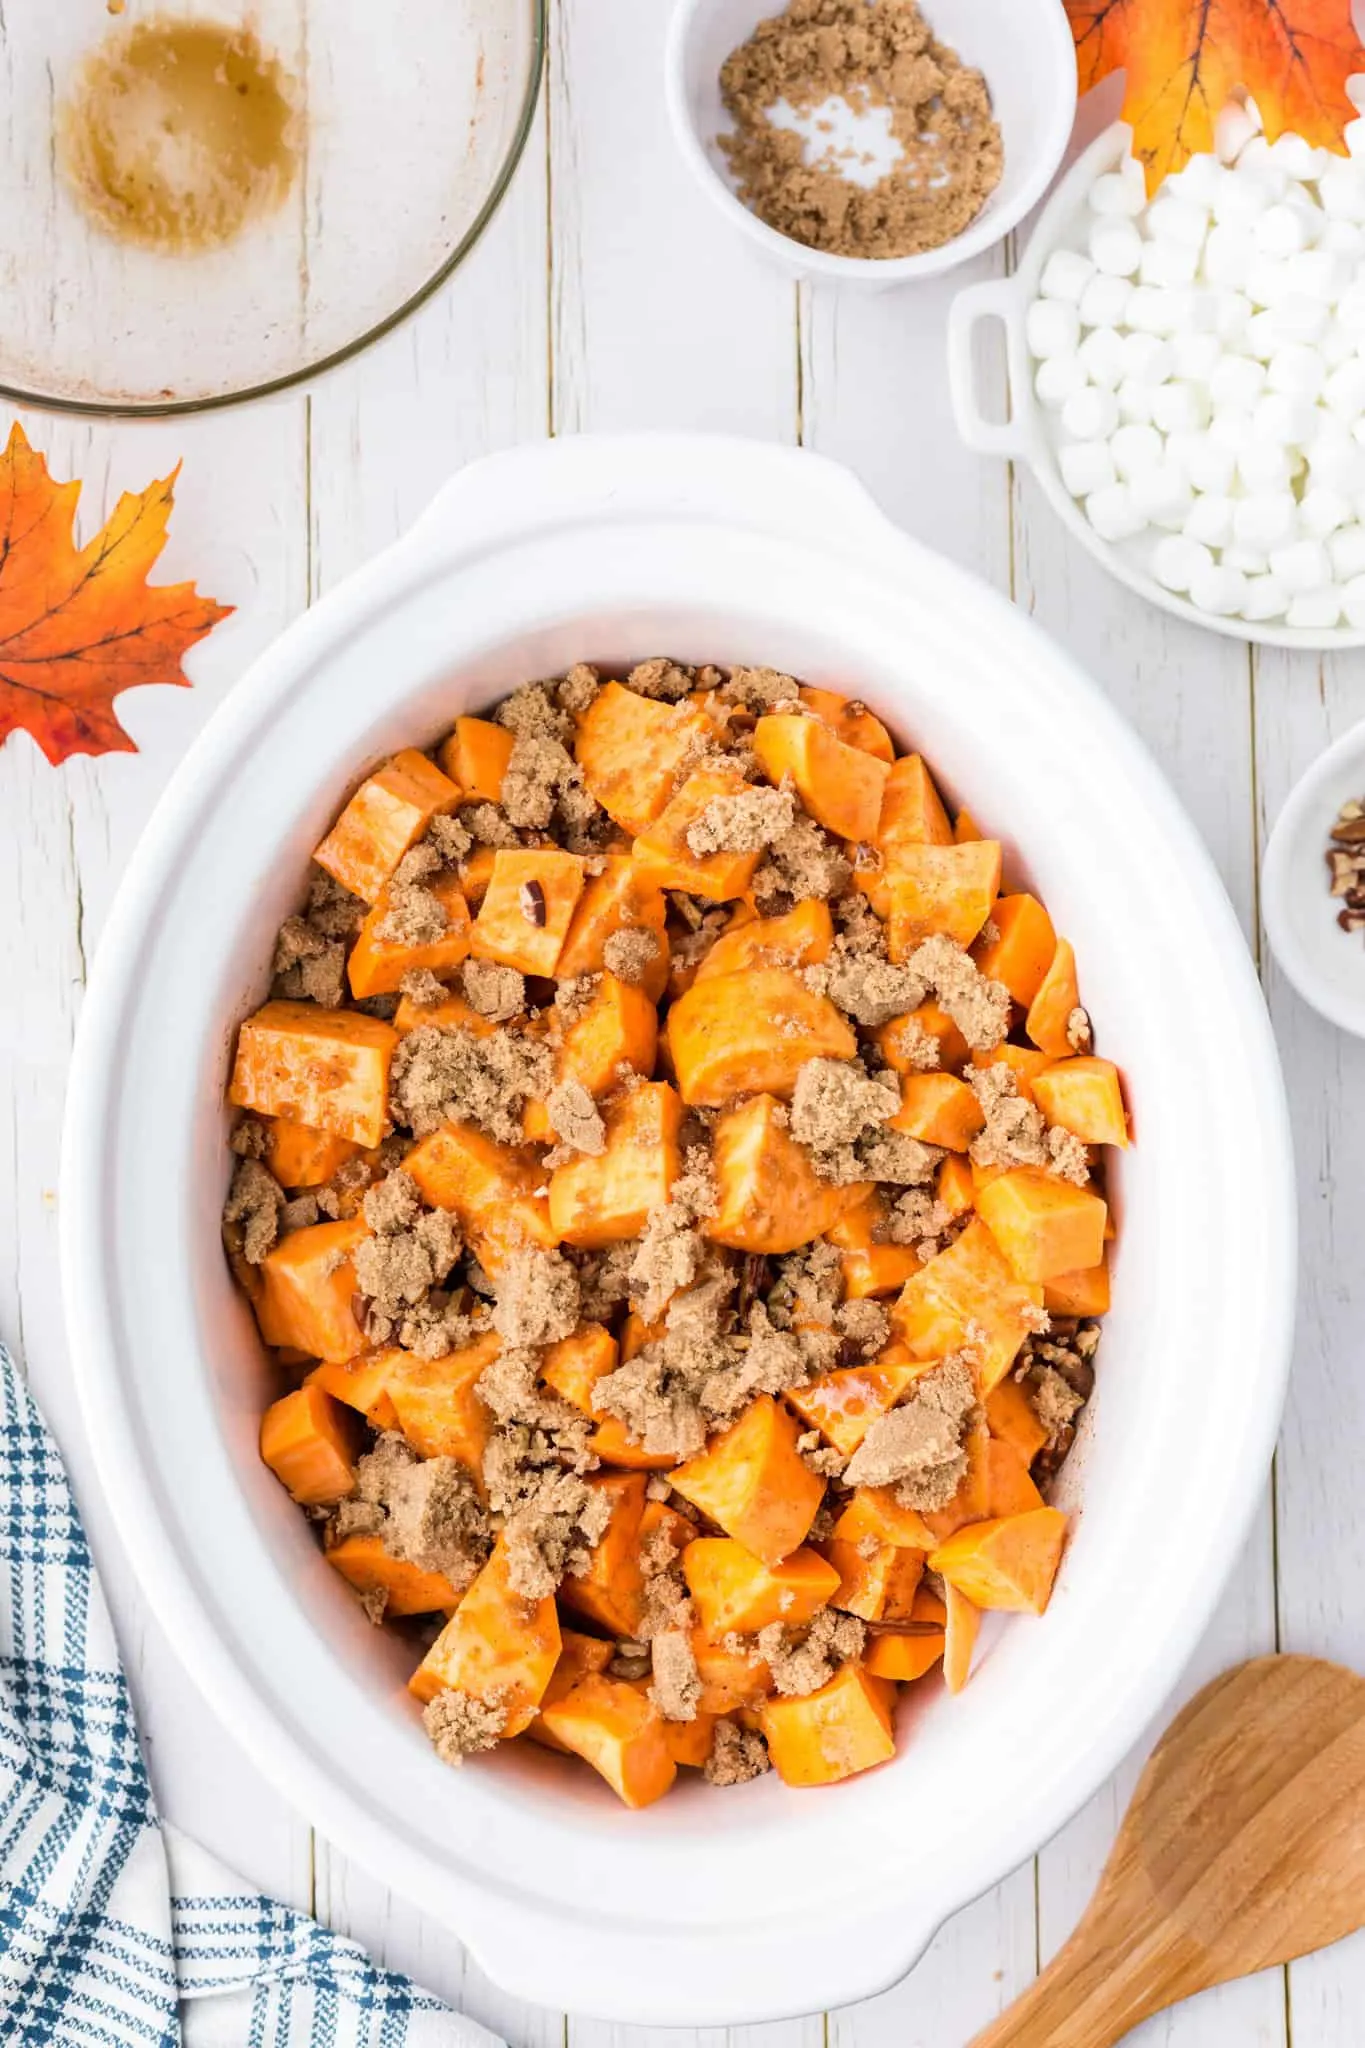 brown sugar and chopped pecans on top of cube sweet potatoes in a slow cooker